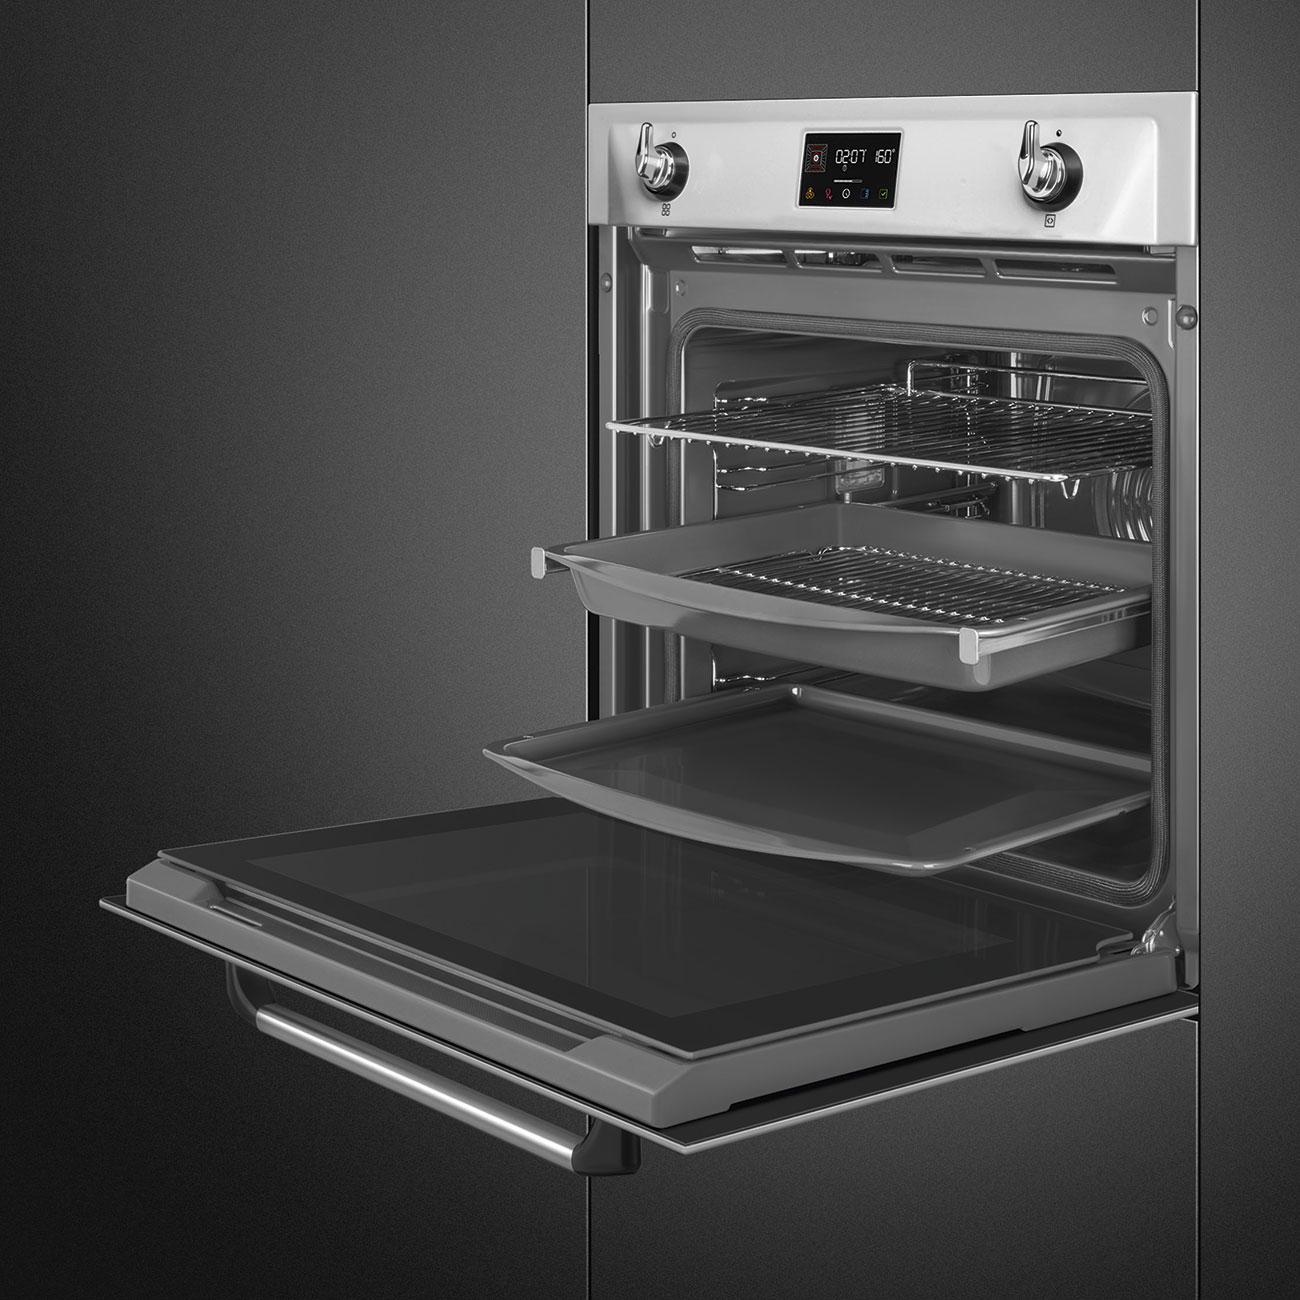 Stainless steel SteamOne Galileo Oven.  60cm. Built-in. Smeg_4